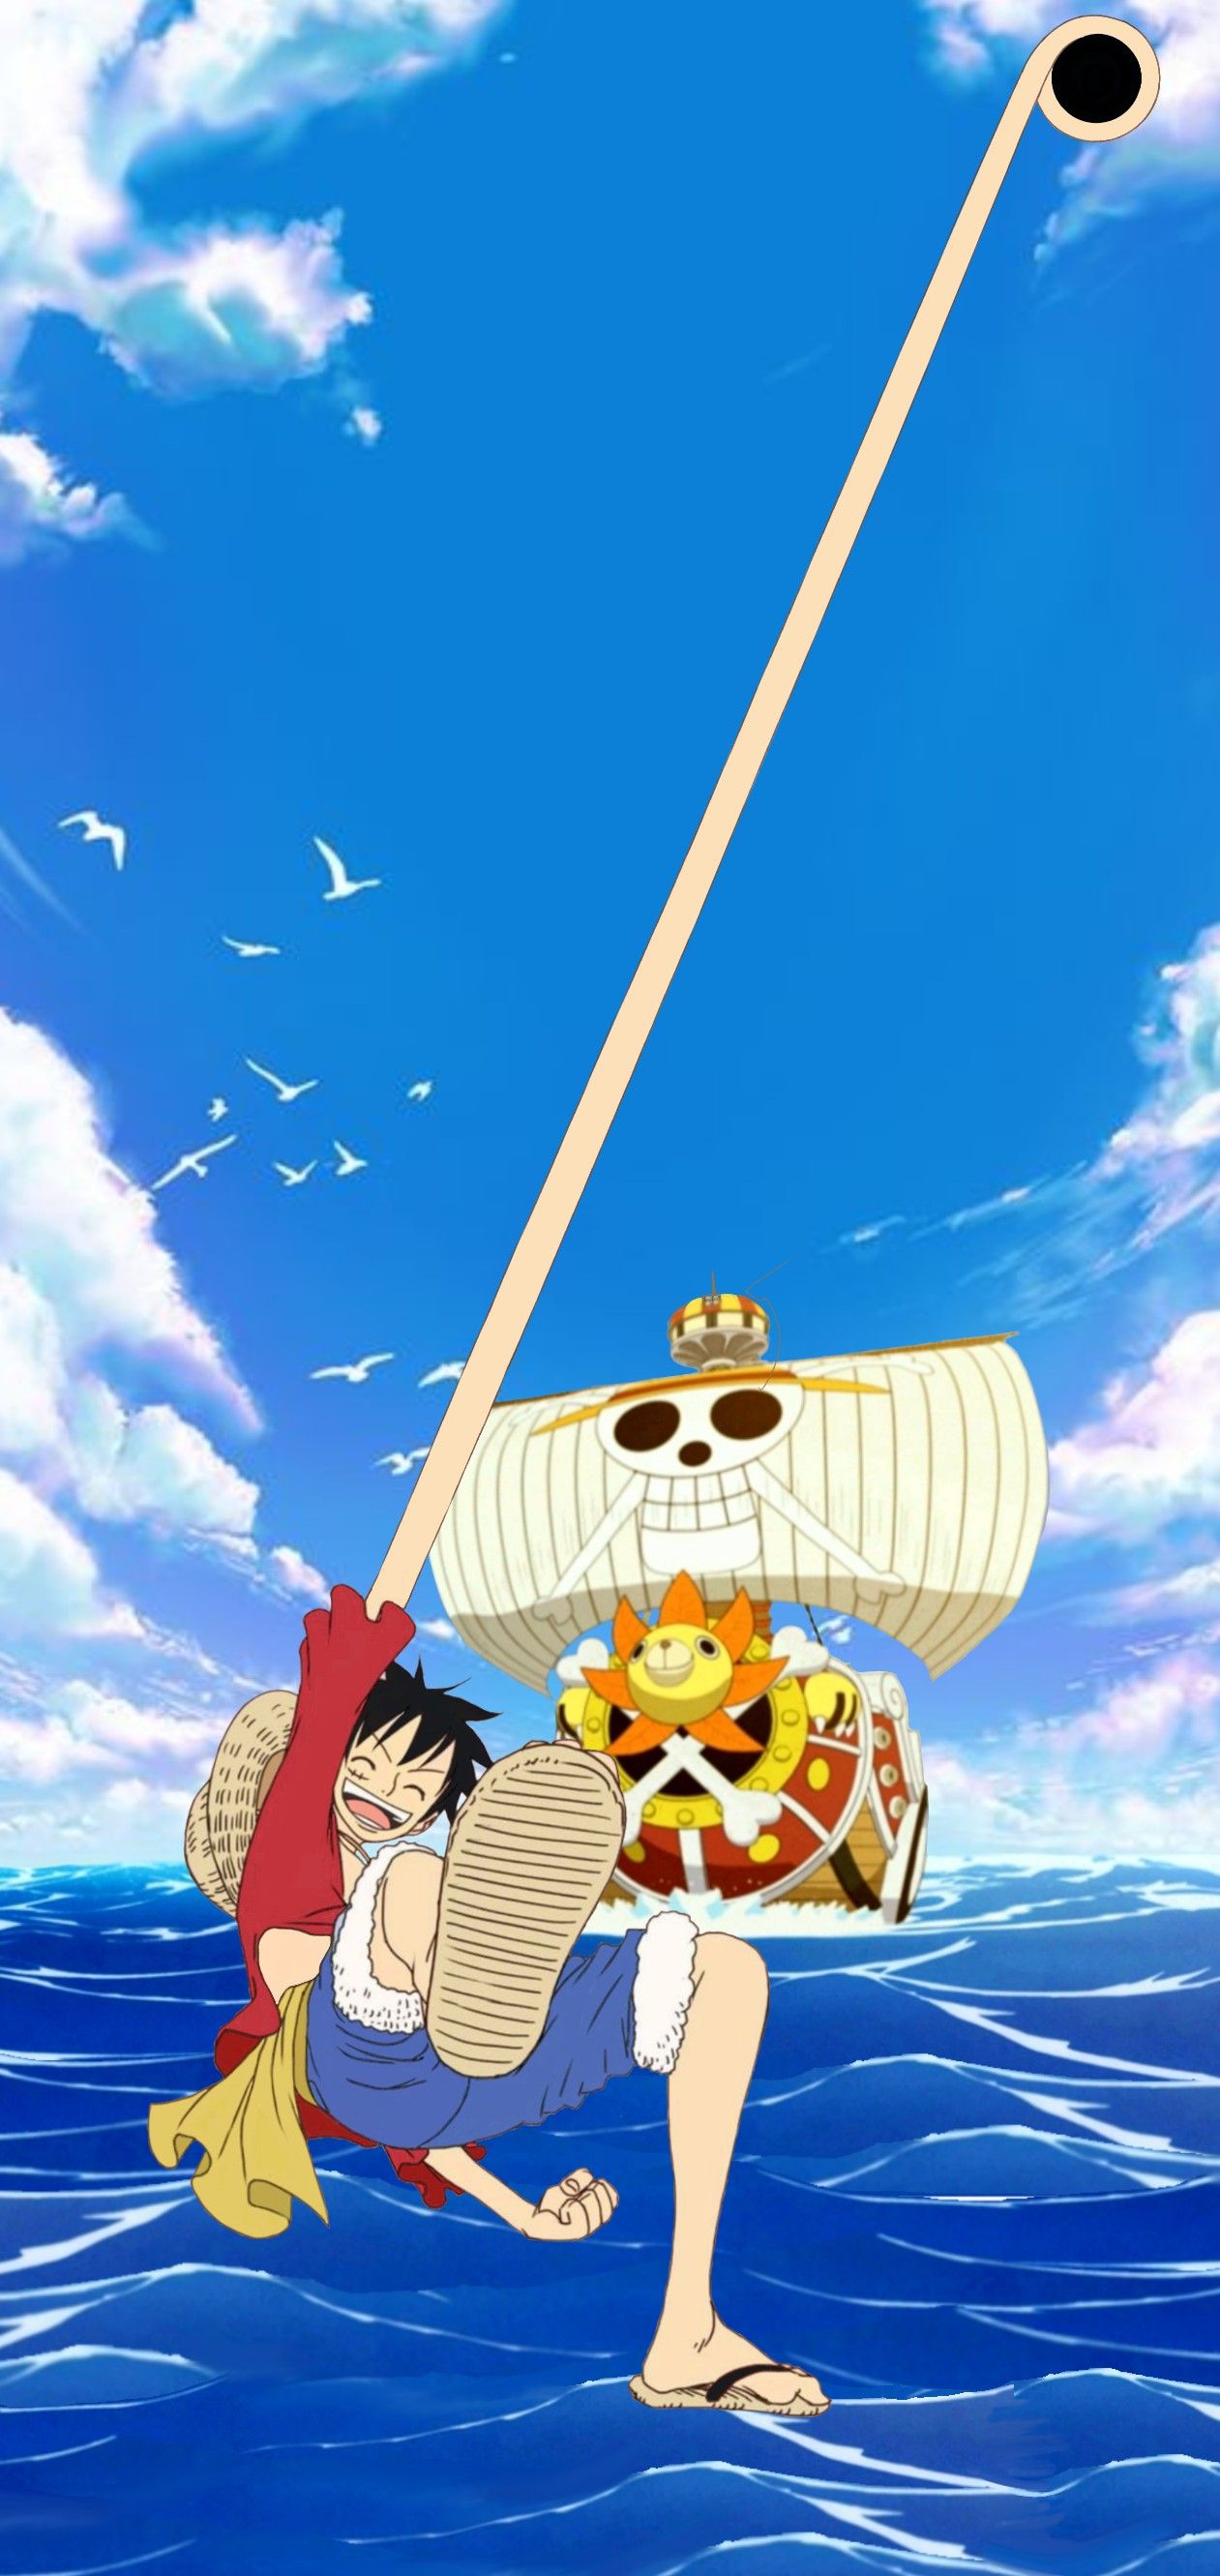 Luffy Ocean Thousand Sunny One Piece Wallpaper Galaxy s10 Luffy's